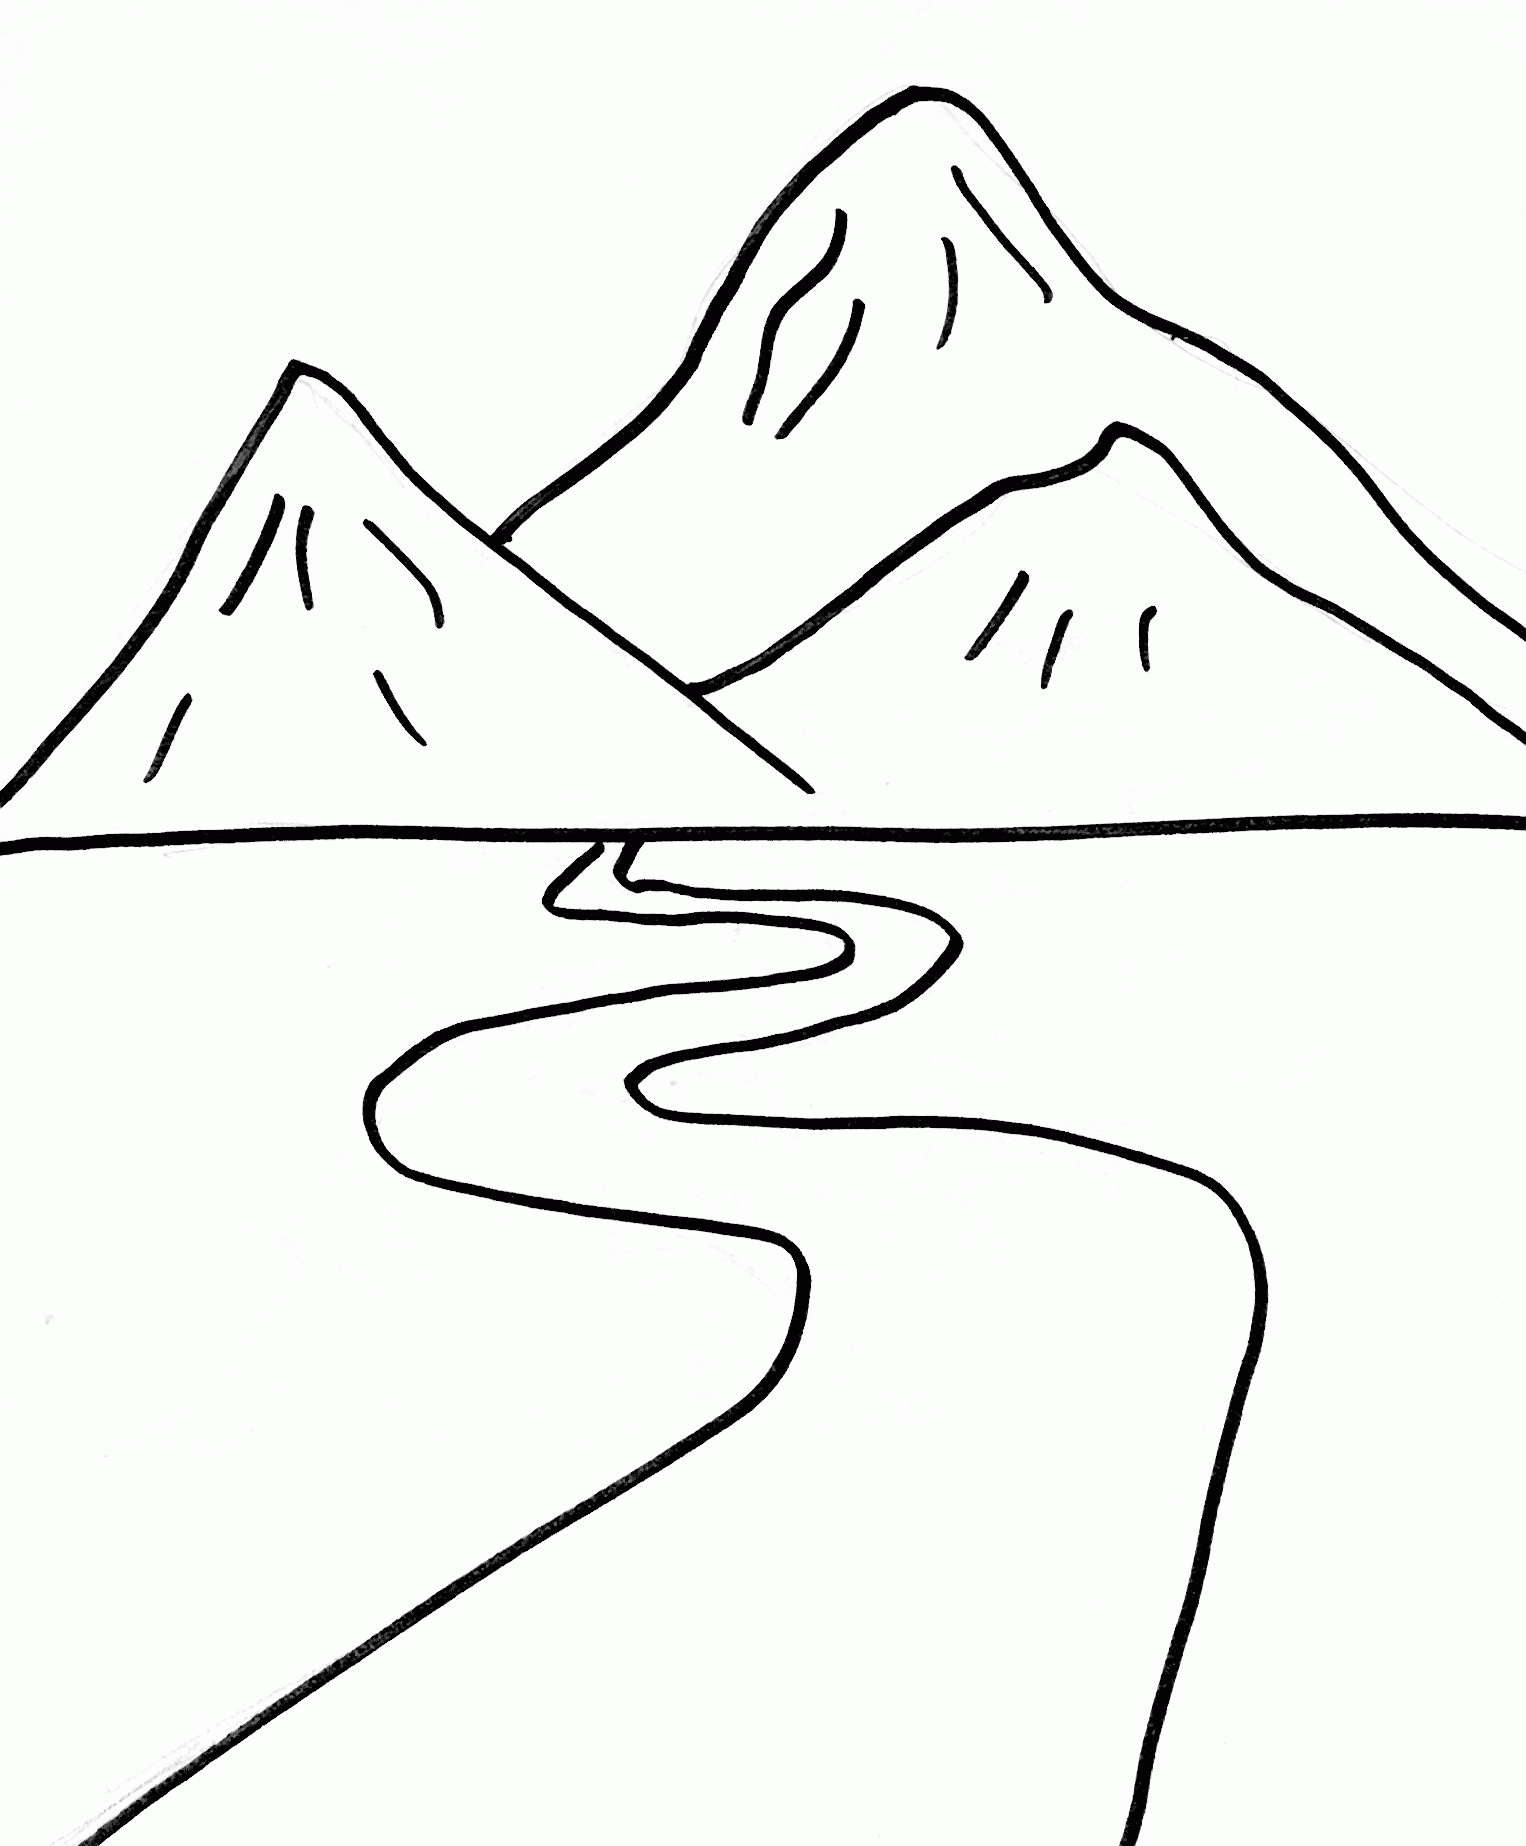 iceberg coloring pages